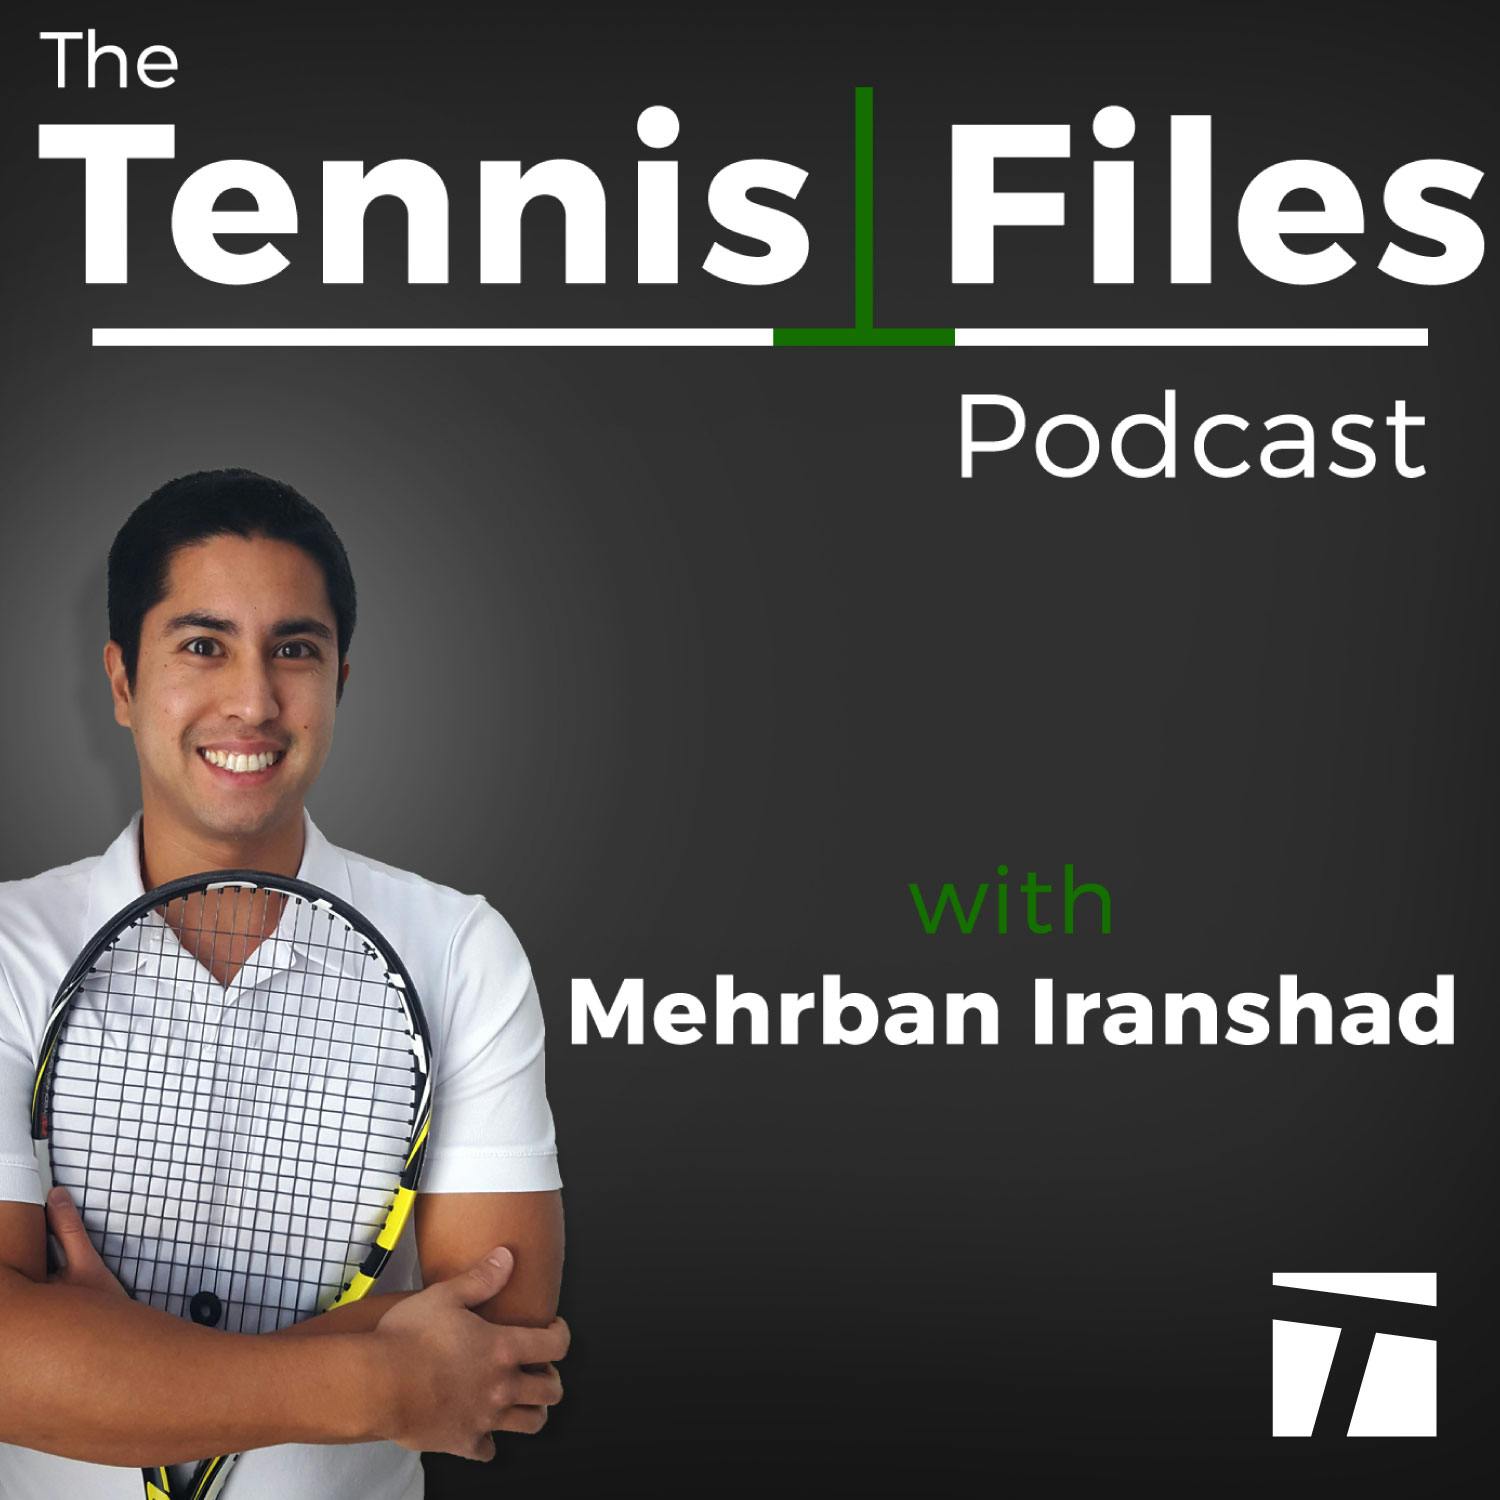 TFP 334: Tennis Racquets and Strings Masterclass with Jonas Eriksson